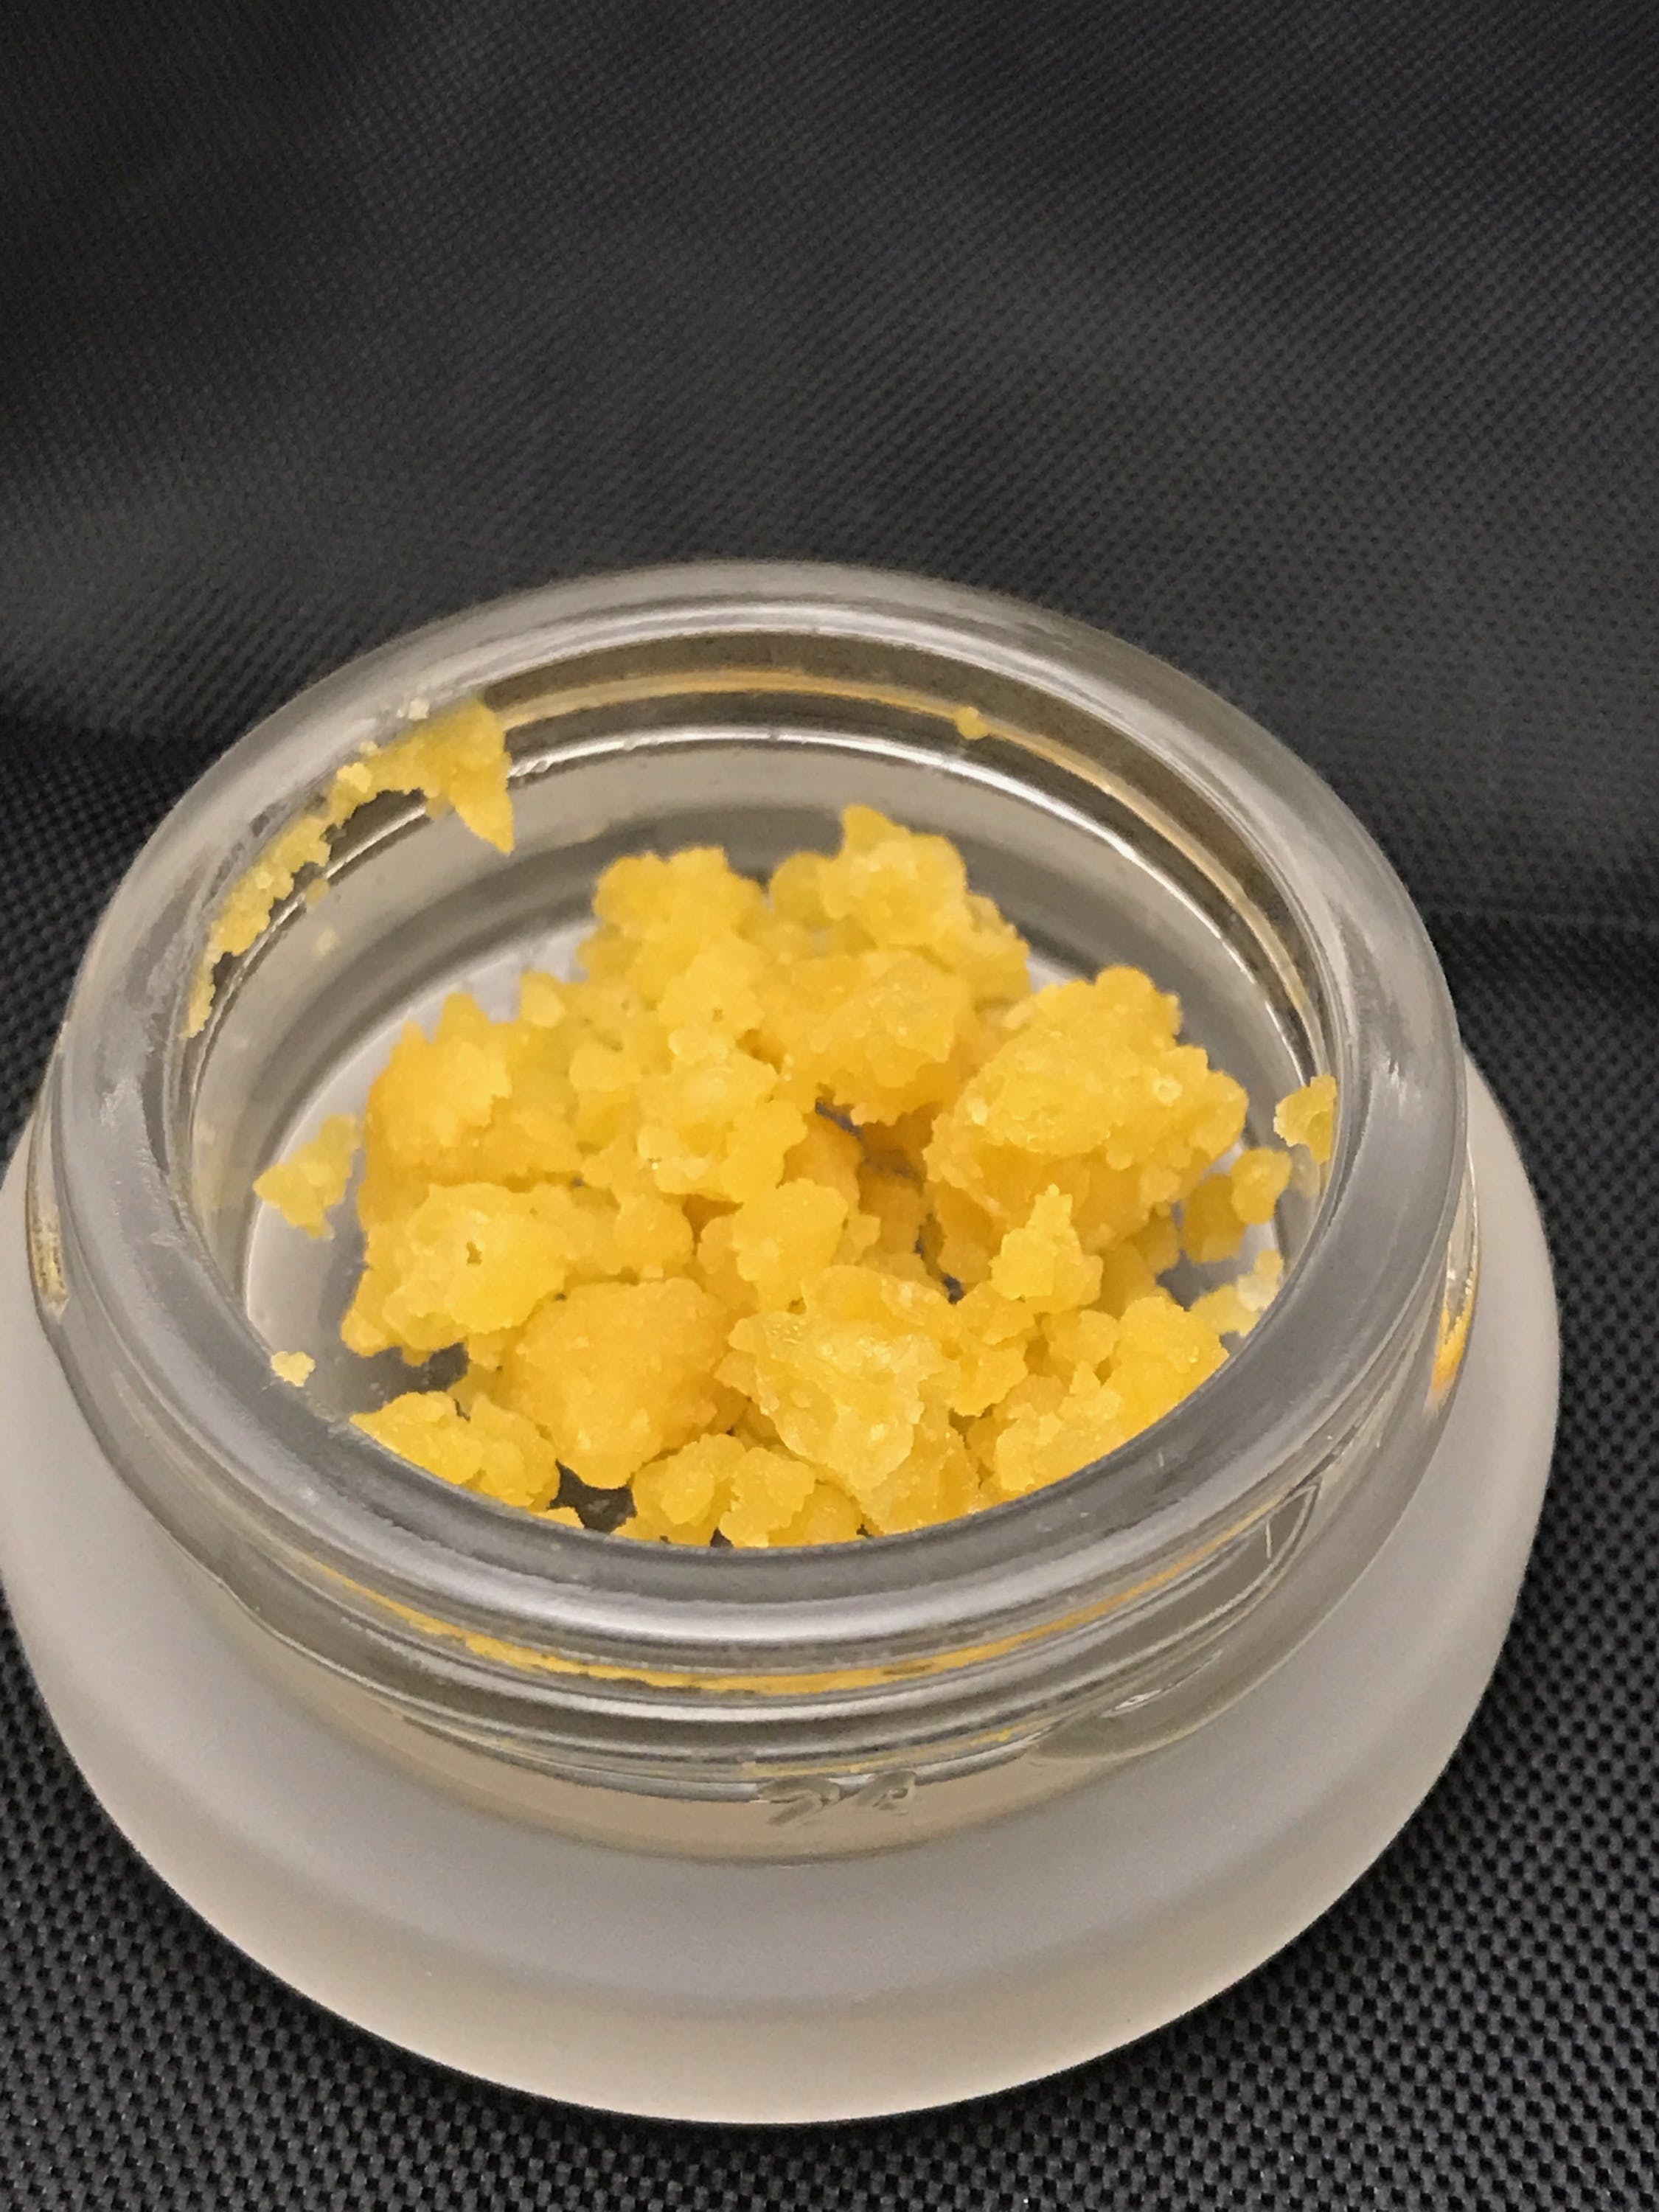 concentrate-infinite-live-resin-ghost-of-lee-roy